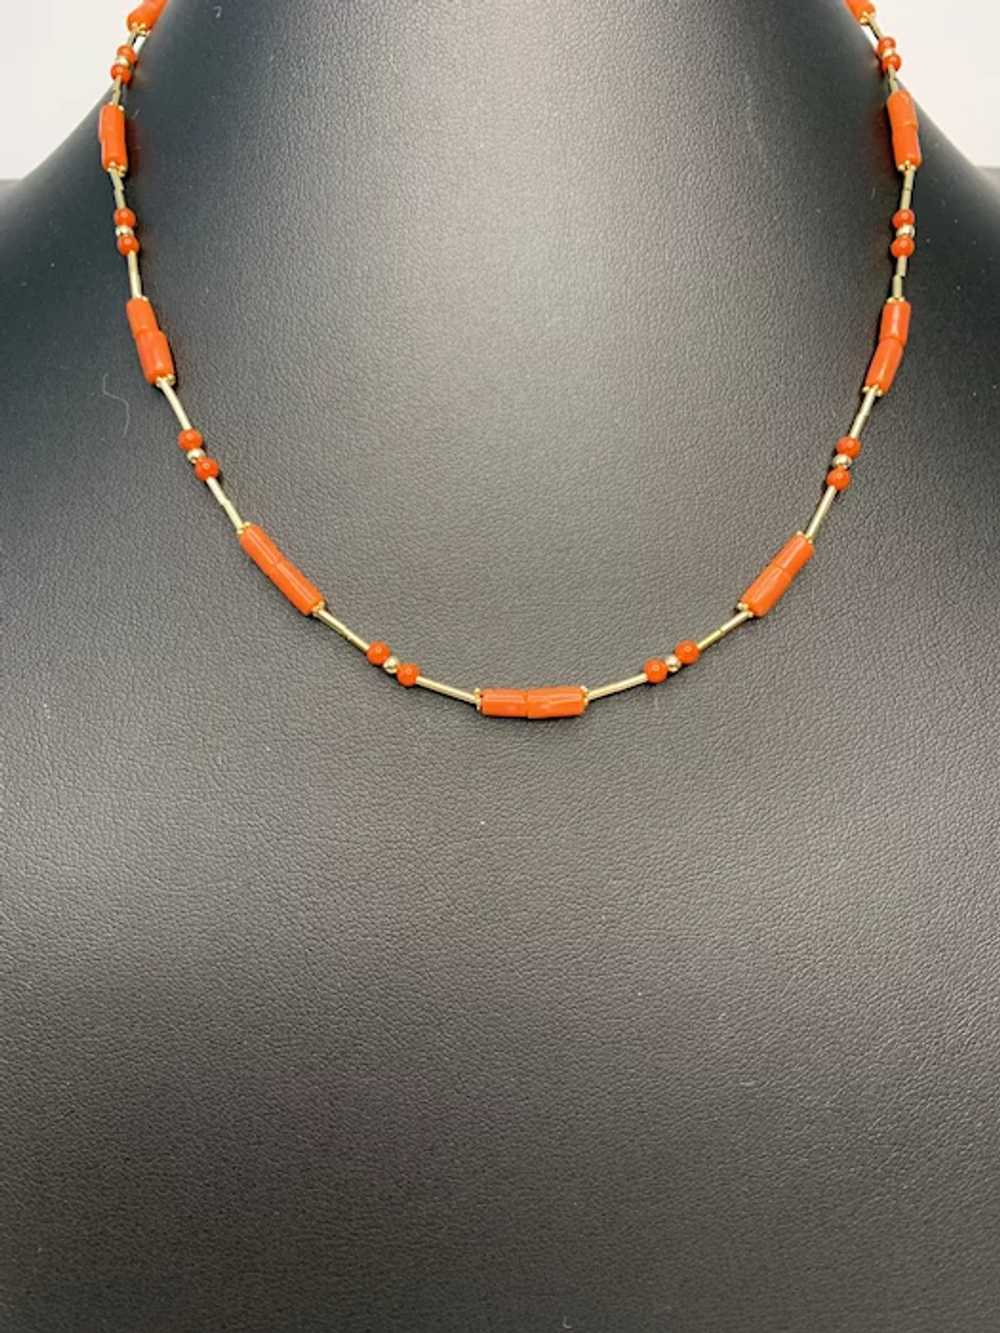 Vintage Salmon Coral and 14k Gold Necklace - image 4